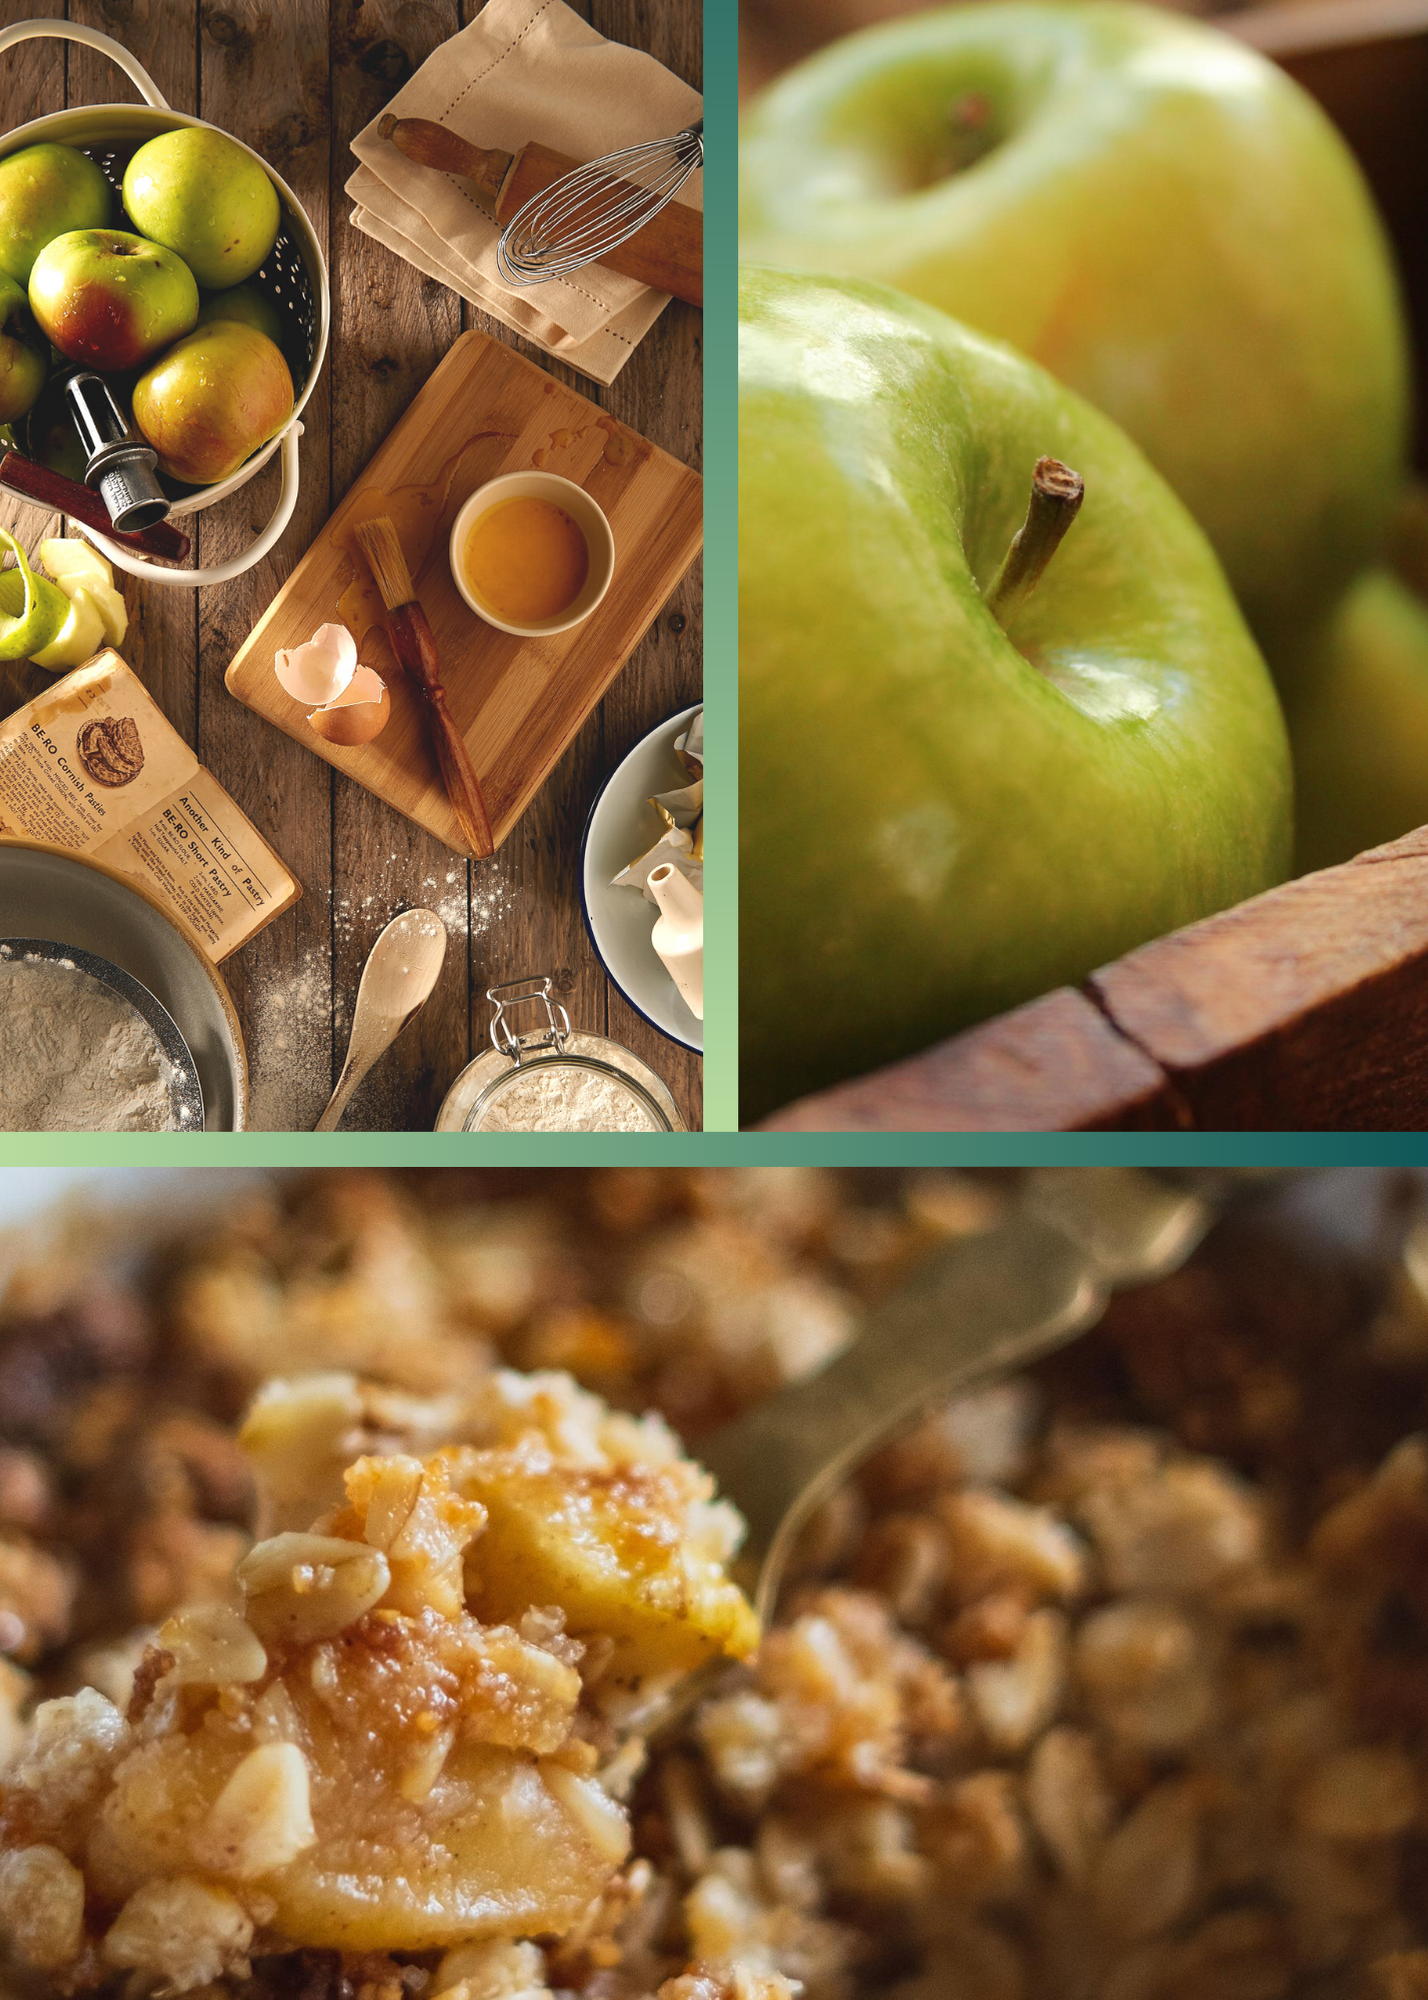 a three picture collage containing photographs of green apples, apple crumble, and baking ingredients.